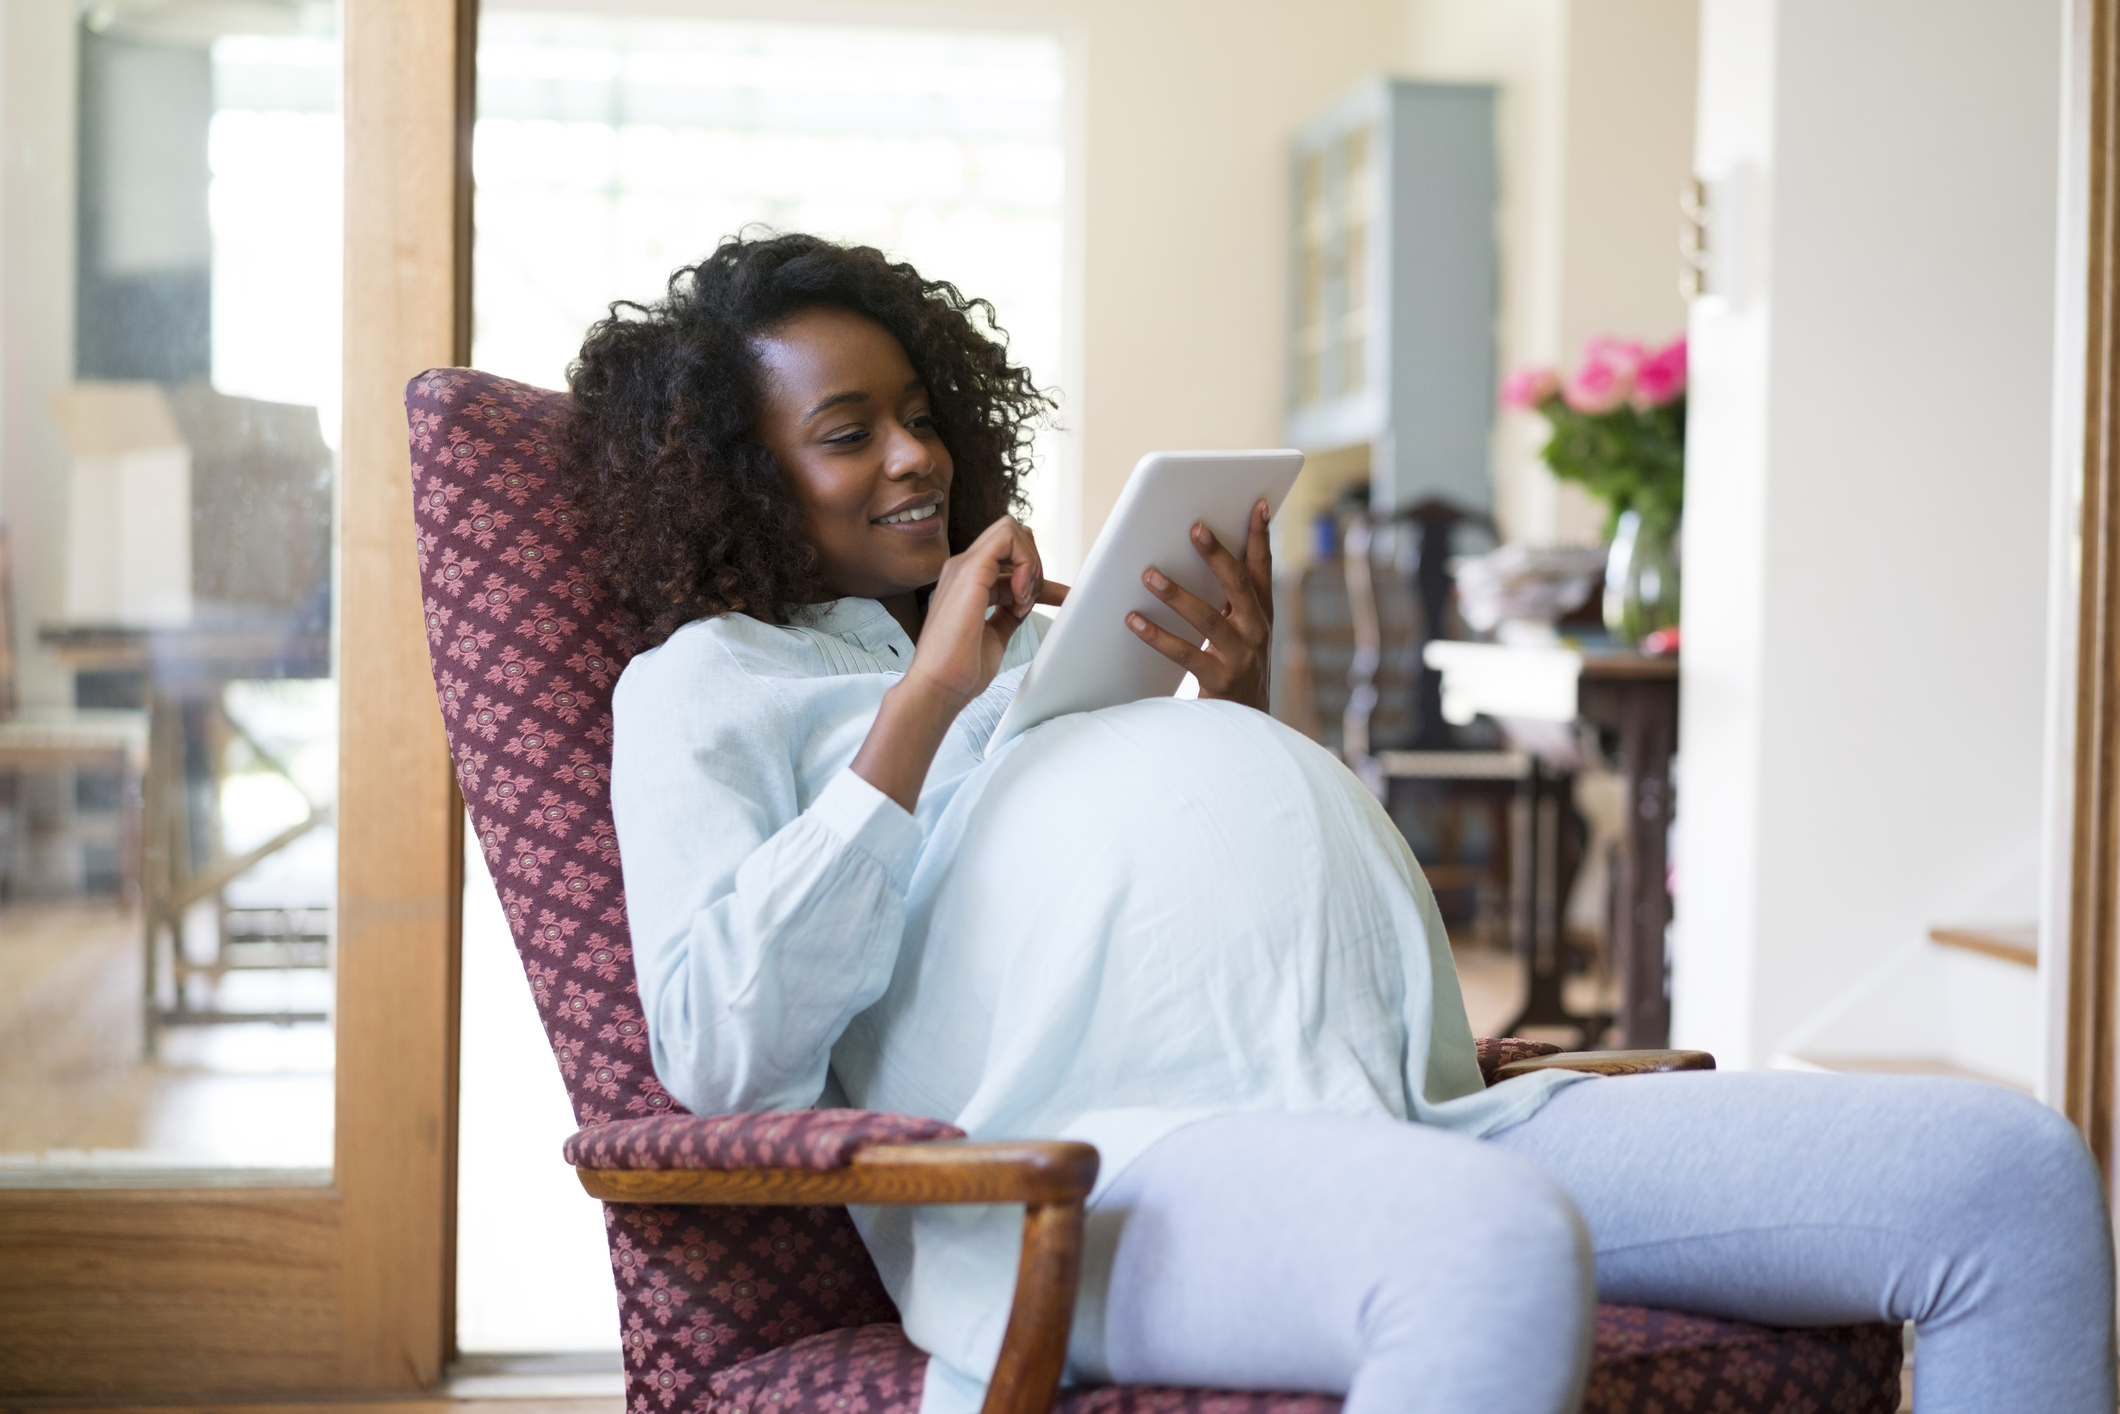 Pregnant woman using digital tablet at home - stock photo